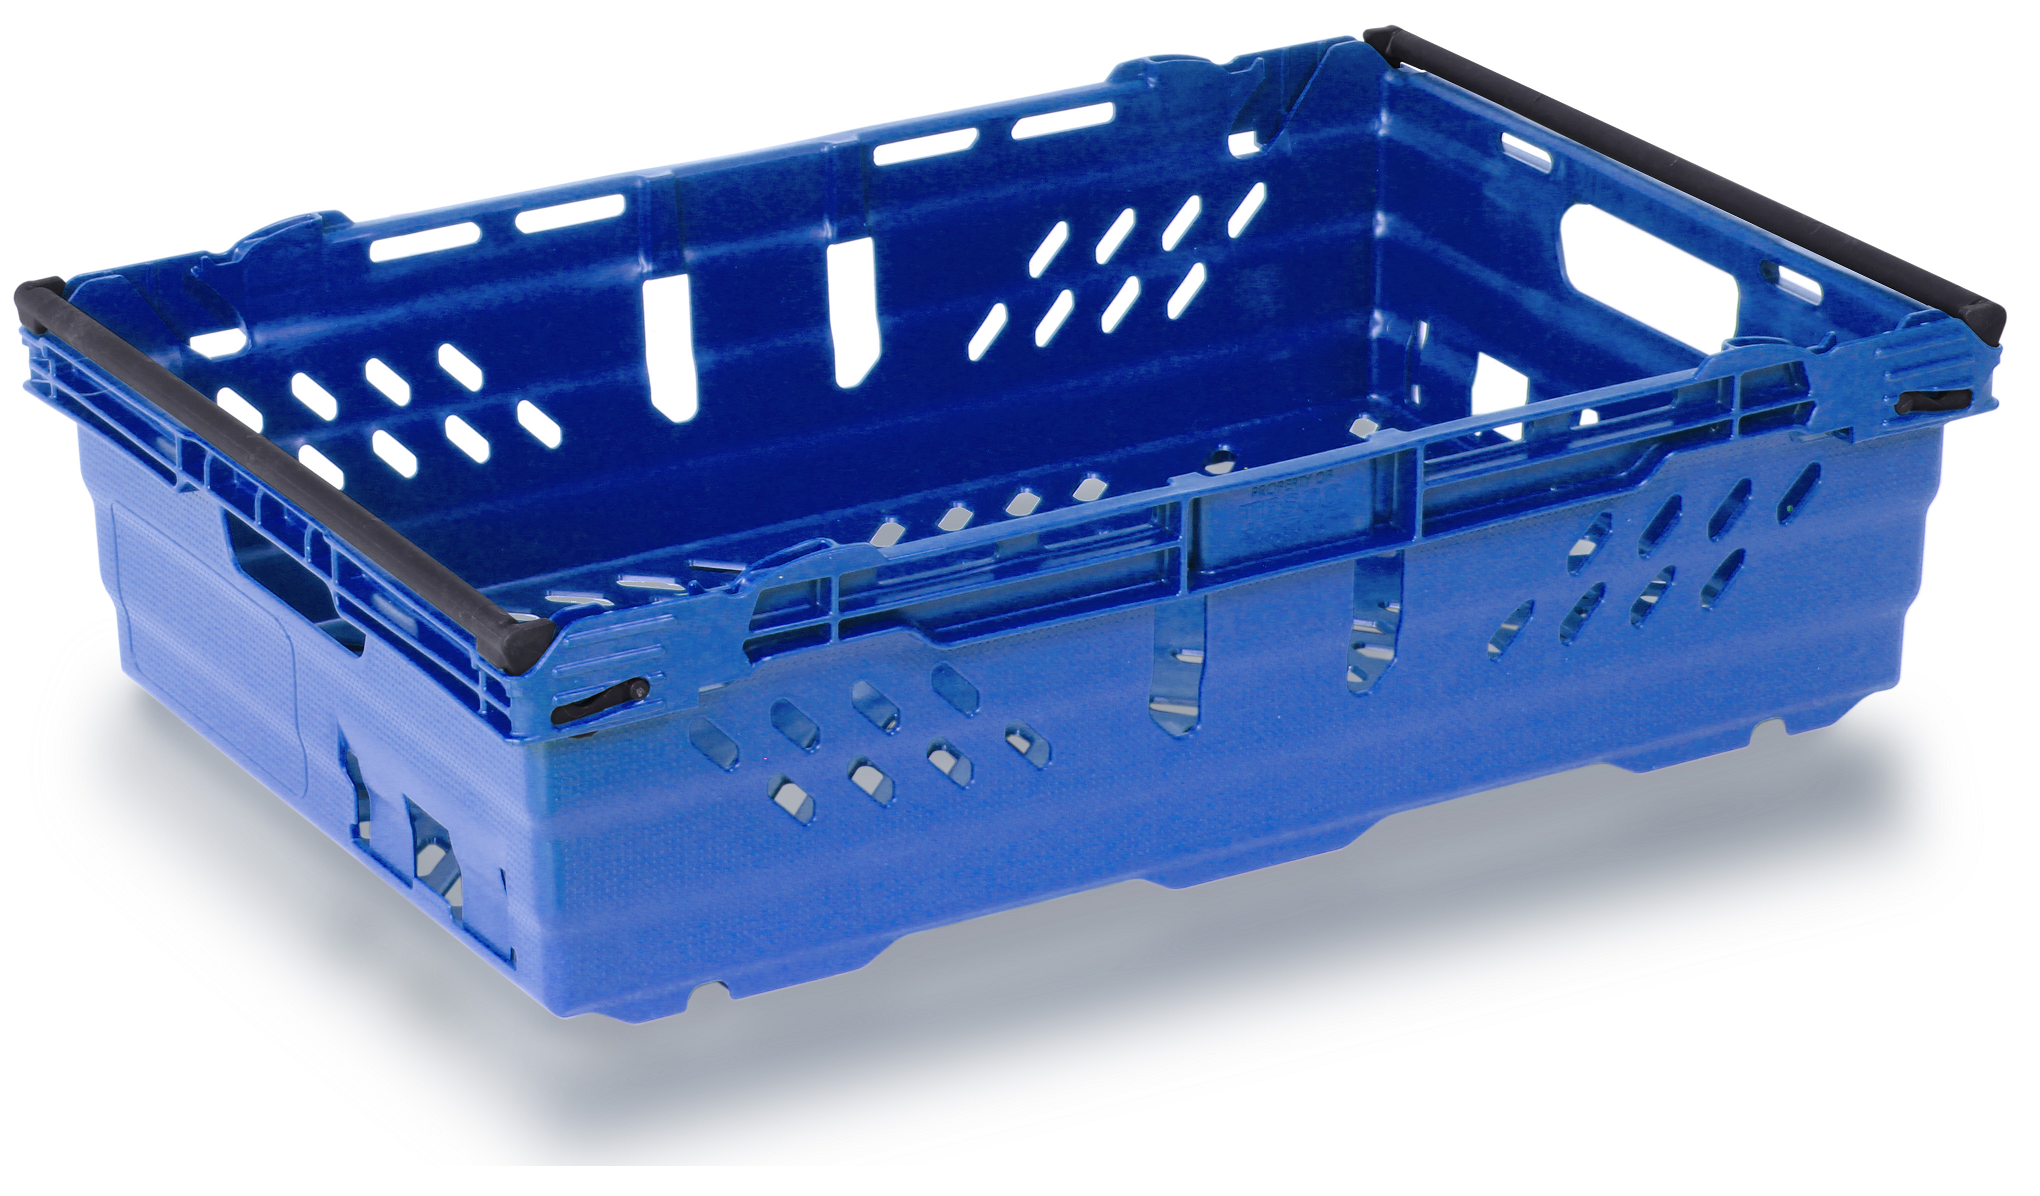 400x300x300 Blue Lidded Container (28 Ltr) For Supermarkets